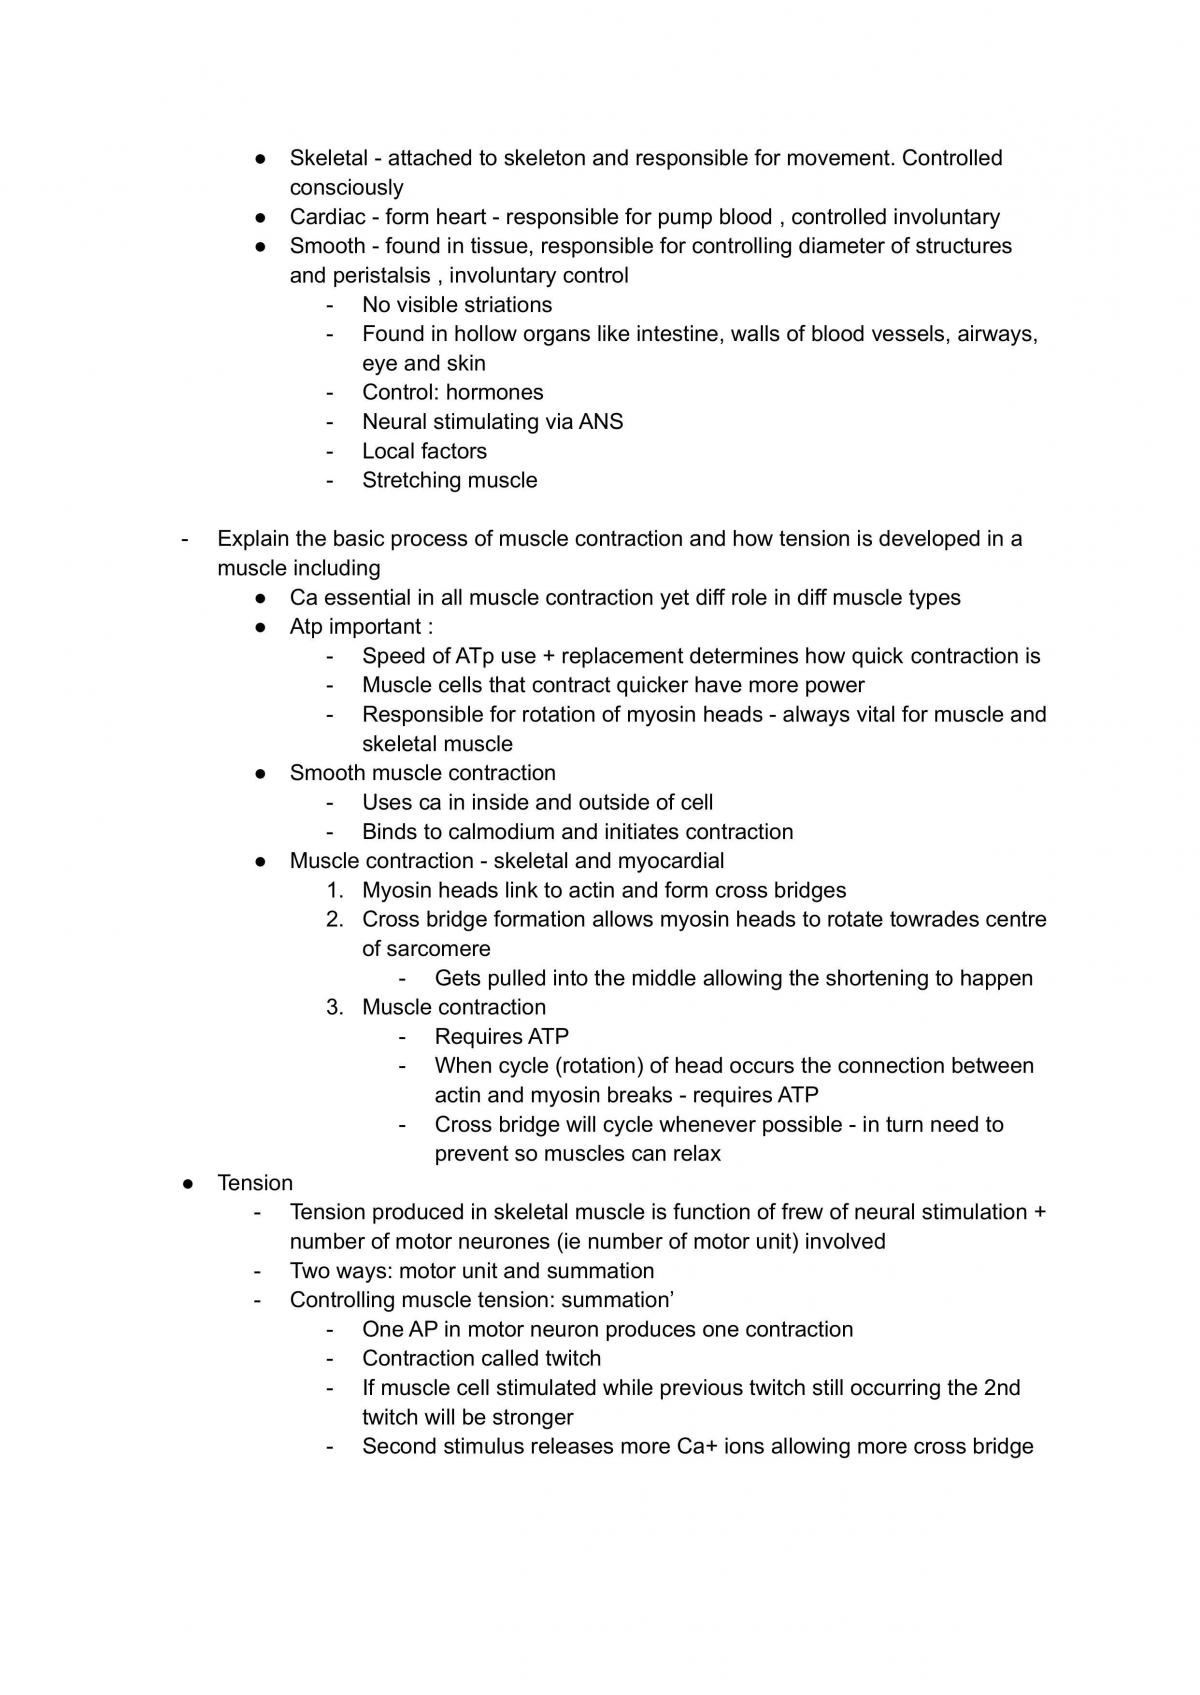 BIOL1008 Full Notes from Topics 11 to 16 - Page 14